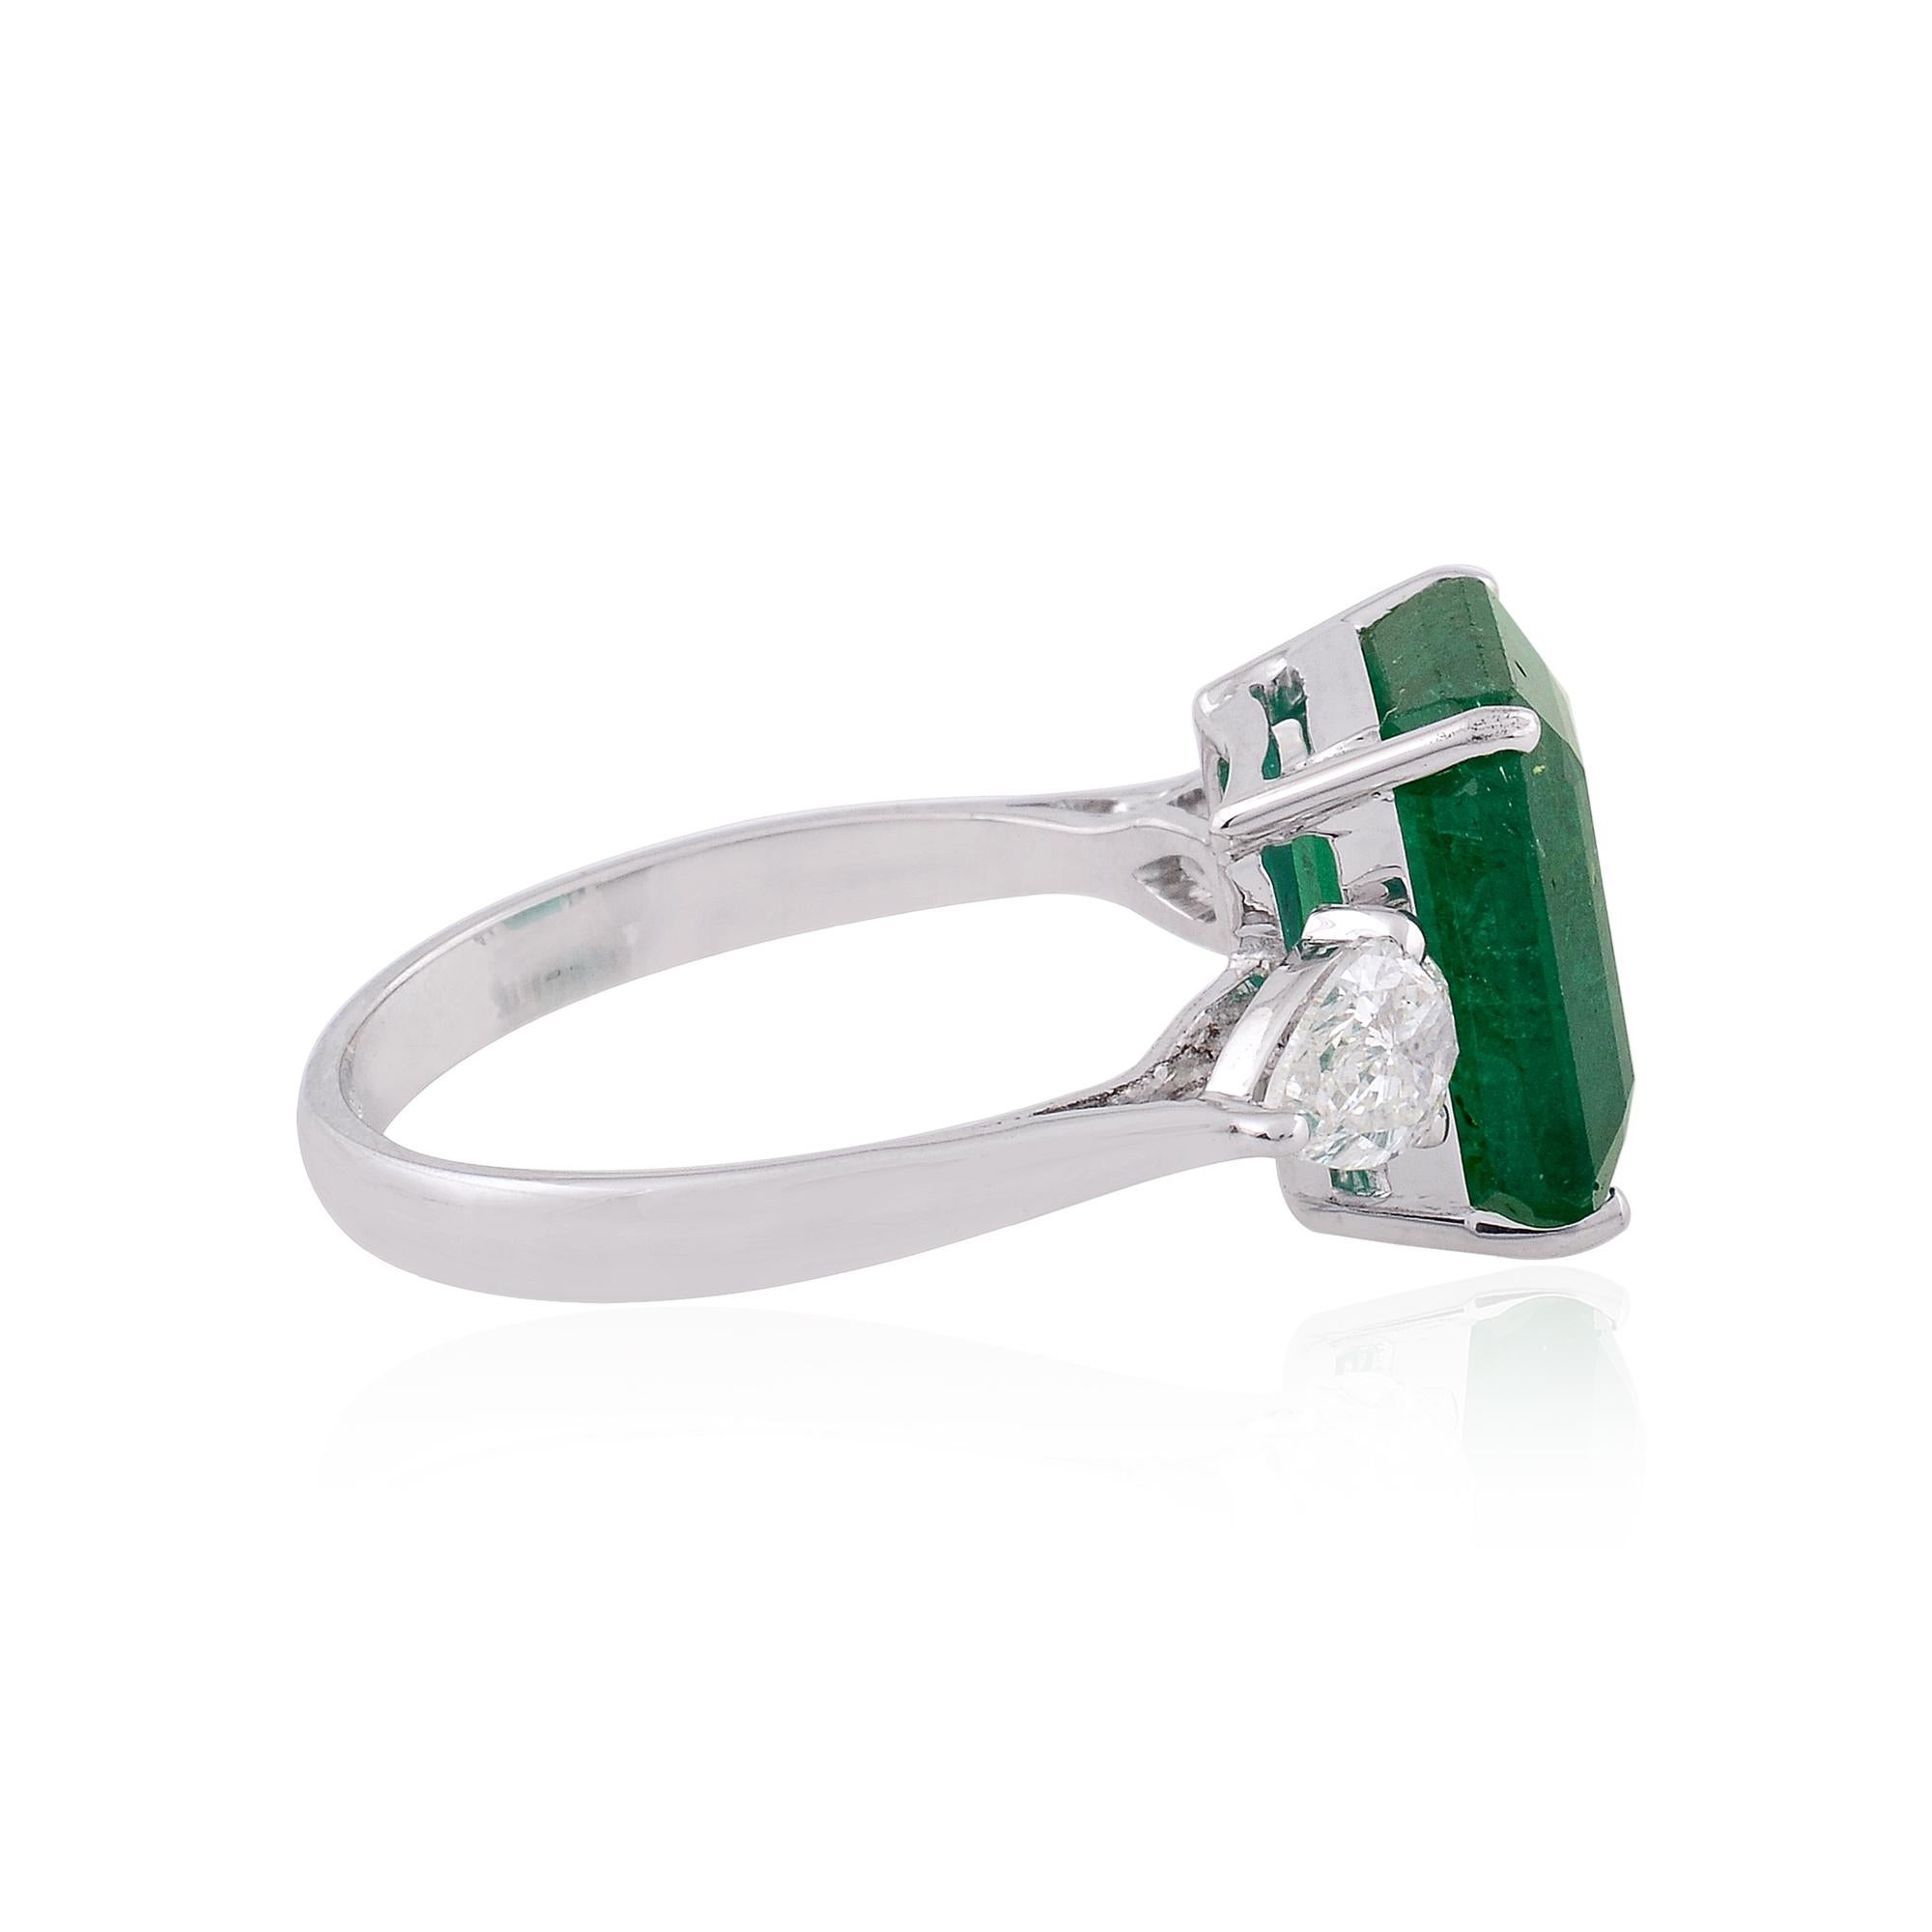 For Sale:  Natural Emerald Gemstone Cocktail Ring Diamond 18k White Gold Handmade Jewelry 5